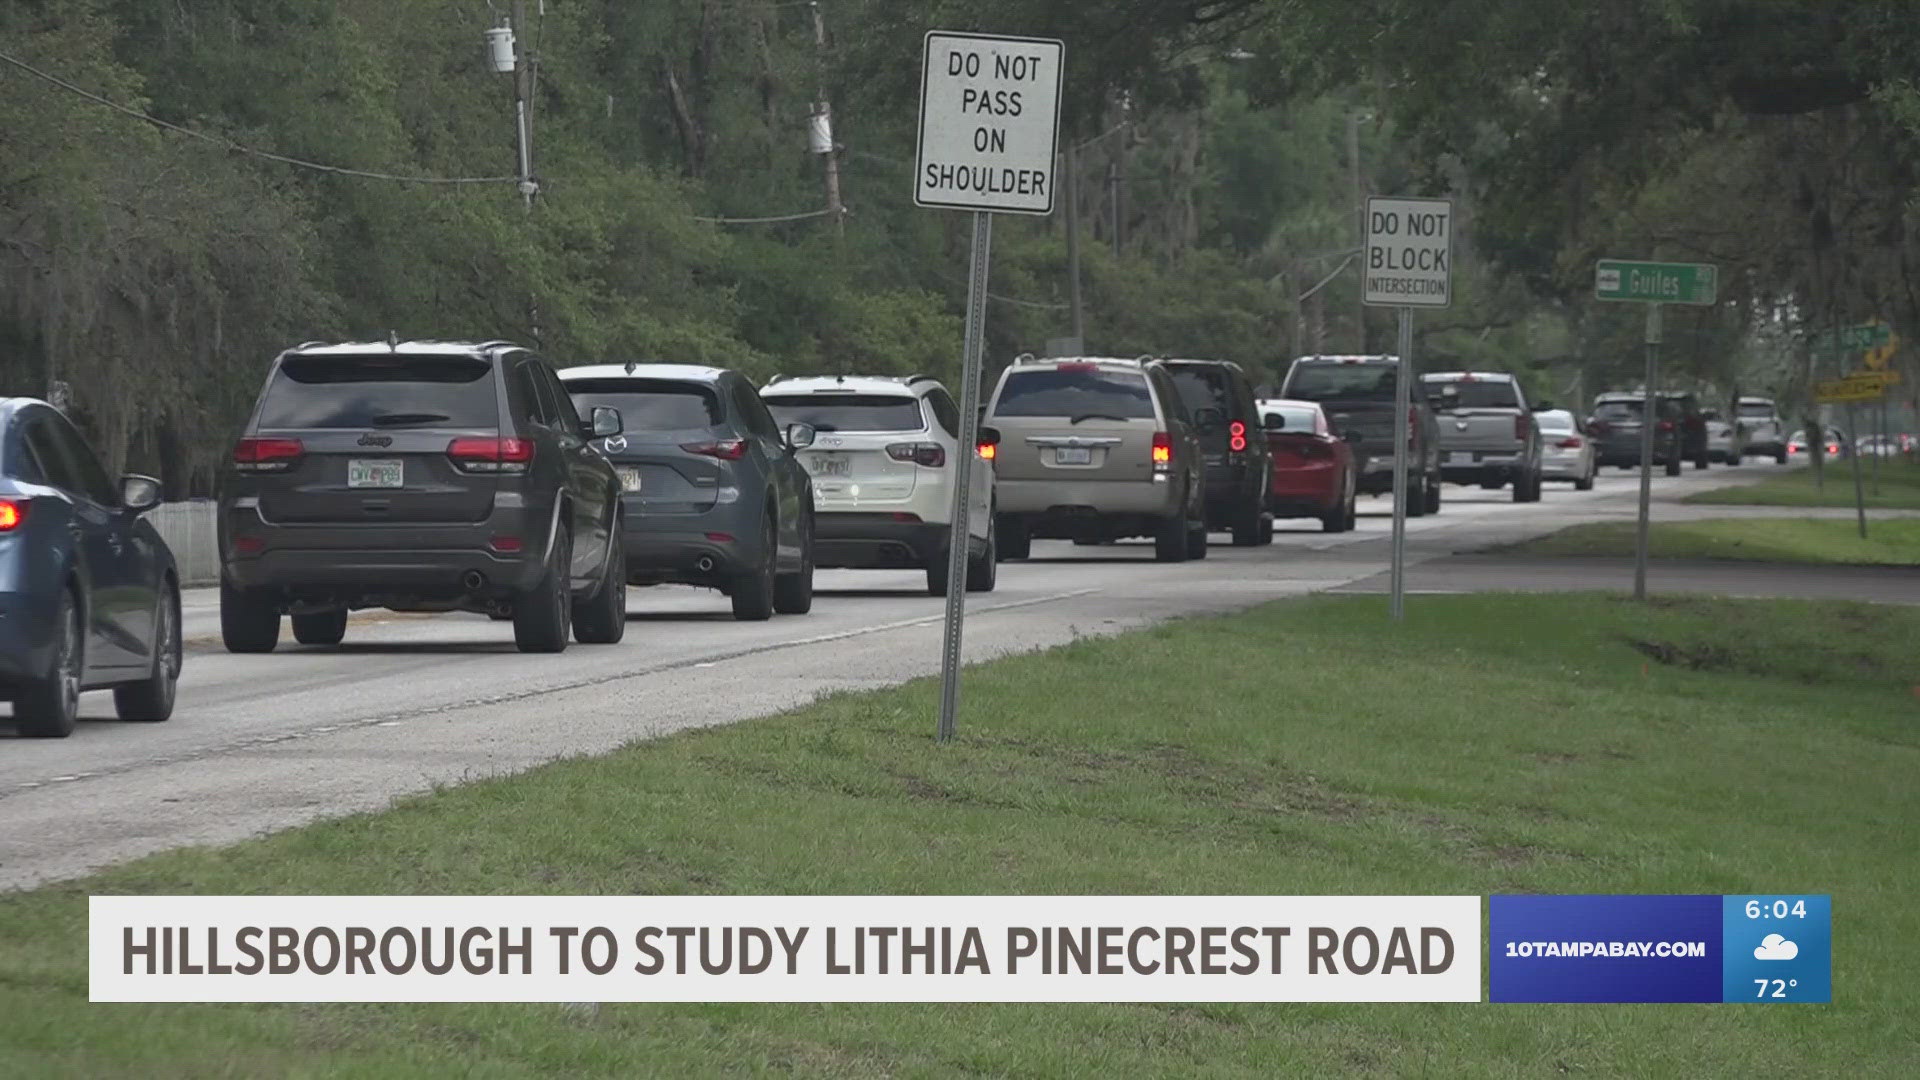 Right now, the project to improve the road includes widening lanes, incorporating more turn lanes, roundabout alternatives for intersections and more.